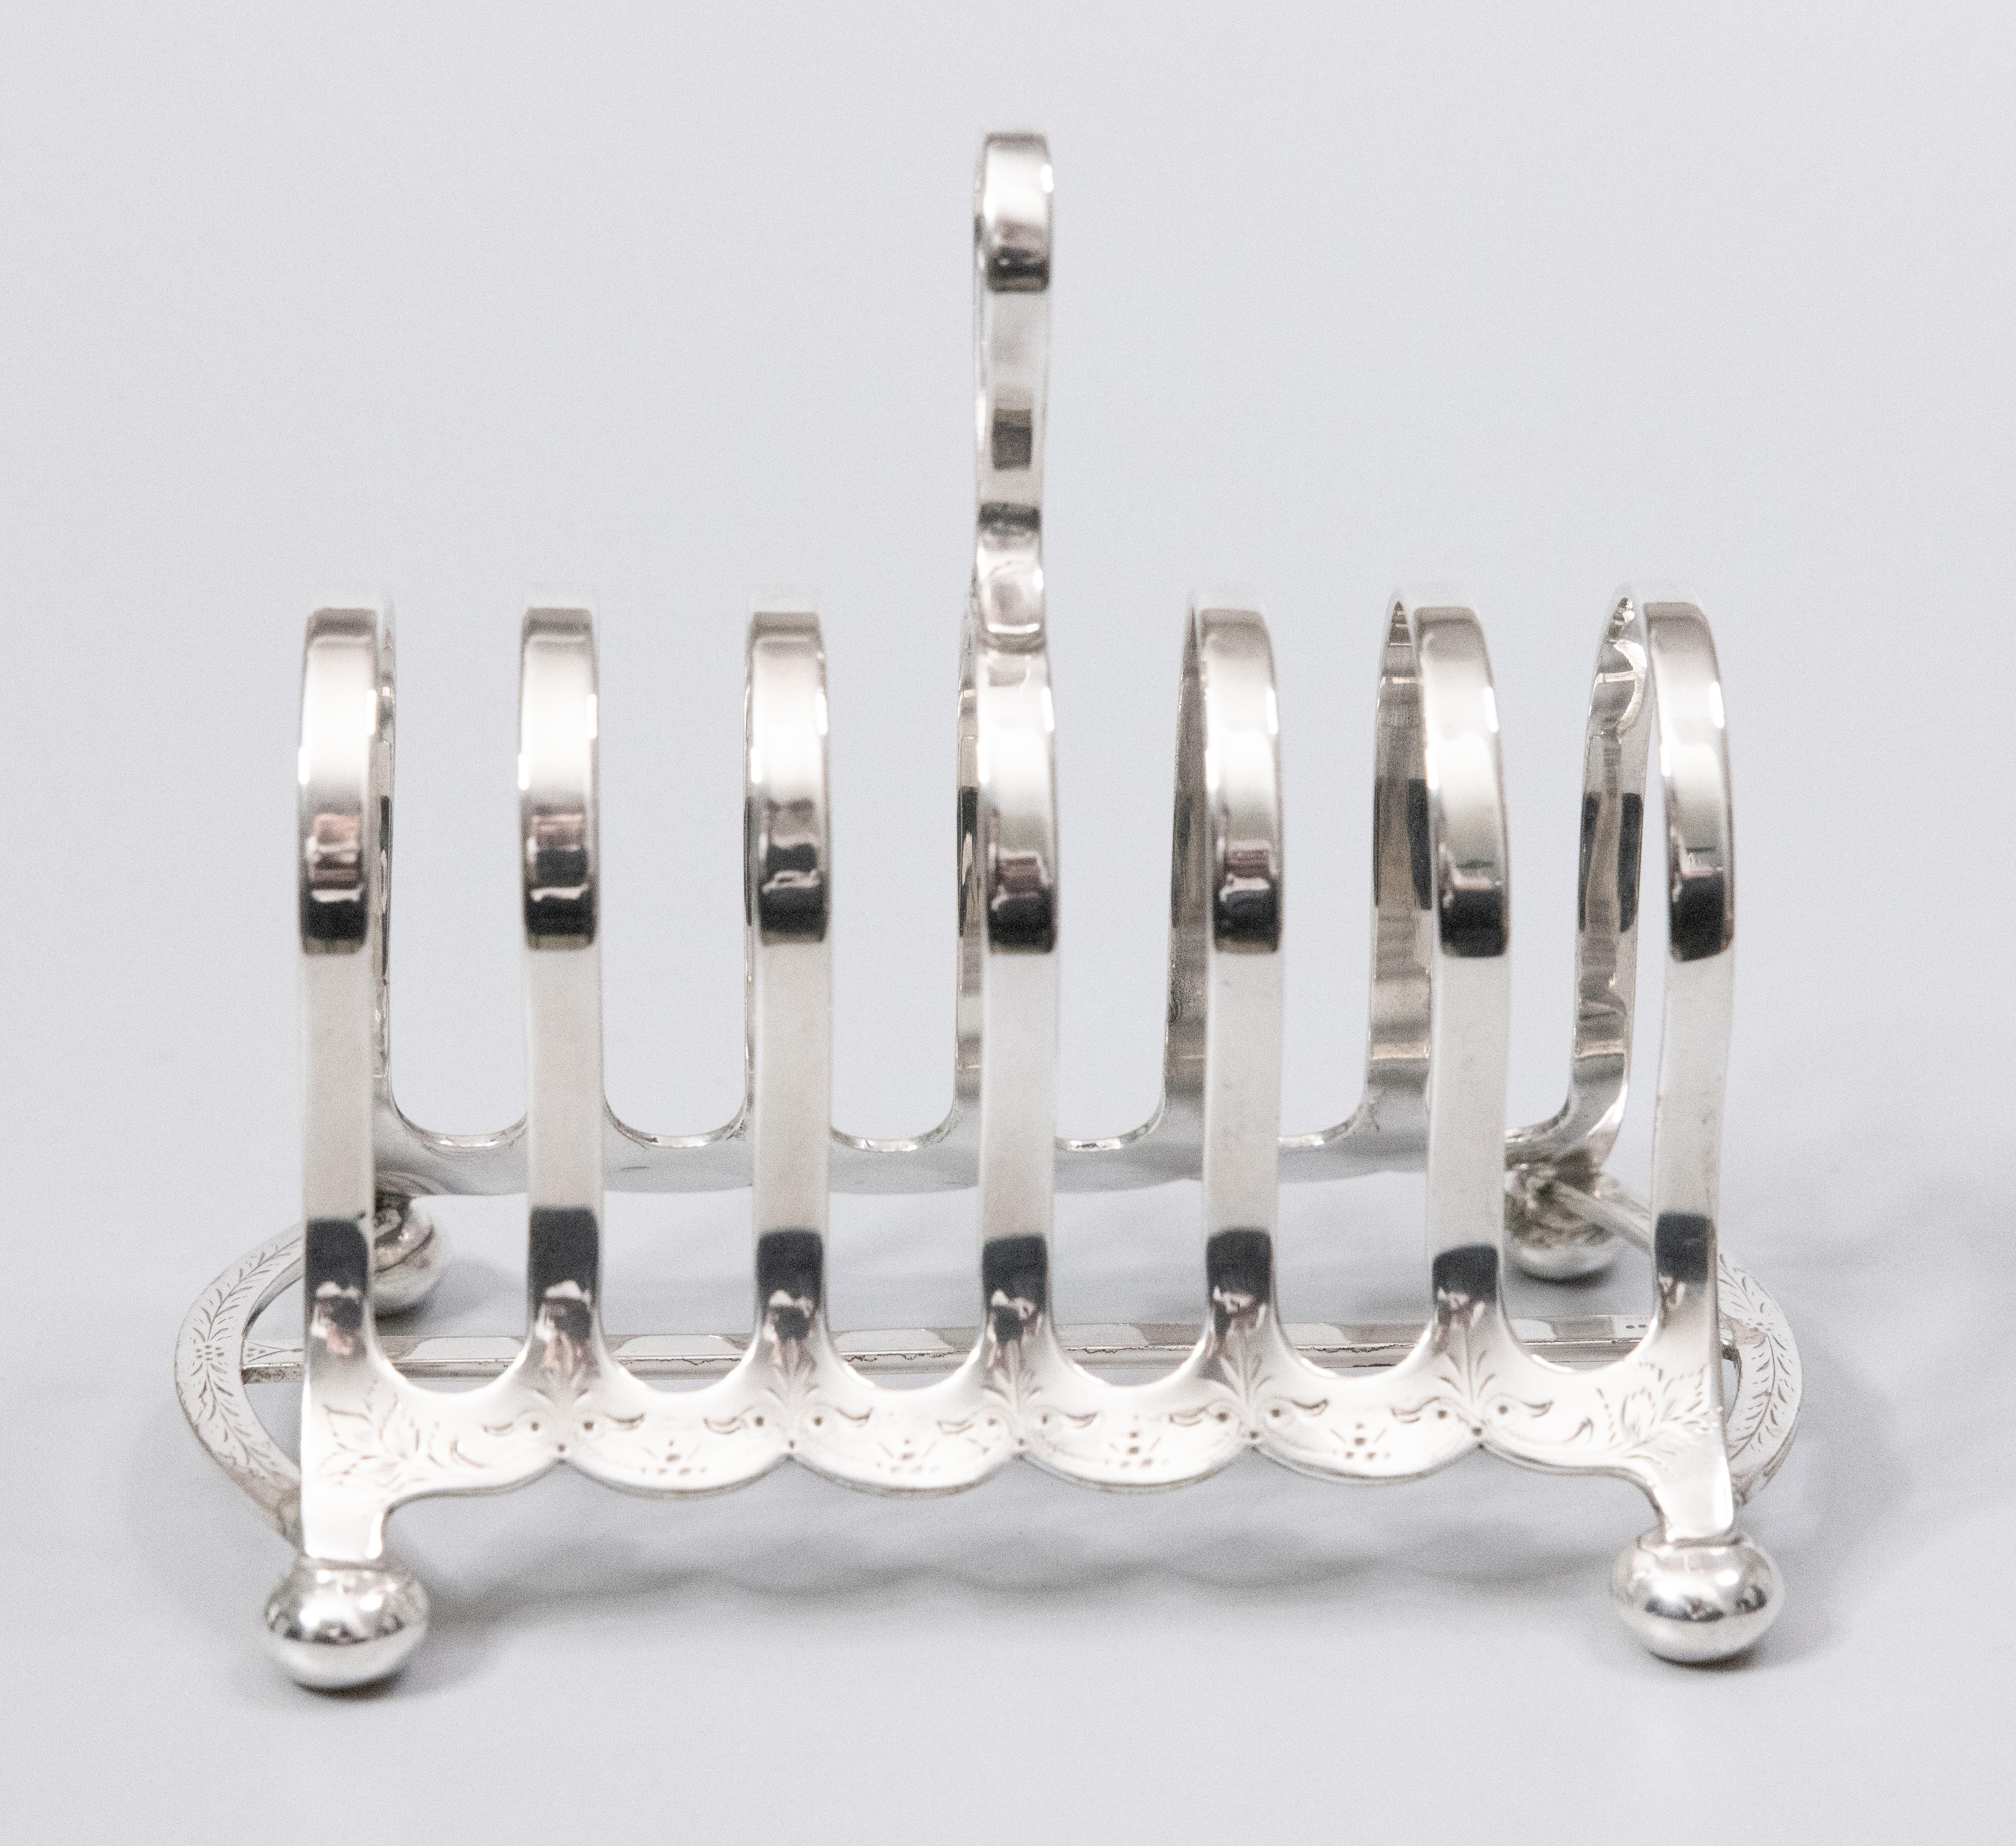 A superb large antique English Victorian silverplated six slice toast rack. Maker's mark on reverse. This fine quality silver toast rack is well made with a lovely arched shape, delicate etched details, and charming bun feet. It would be wonderful